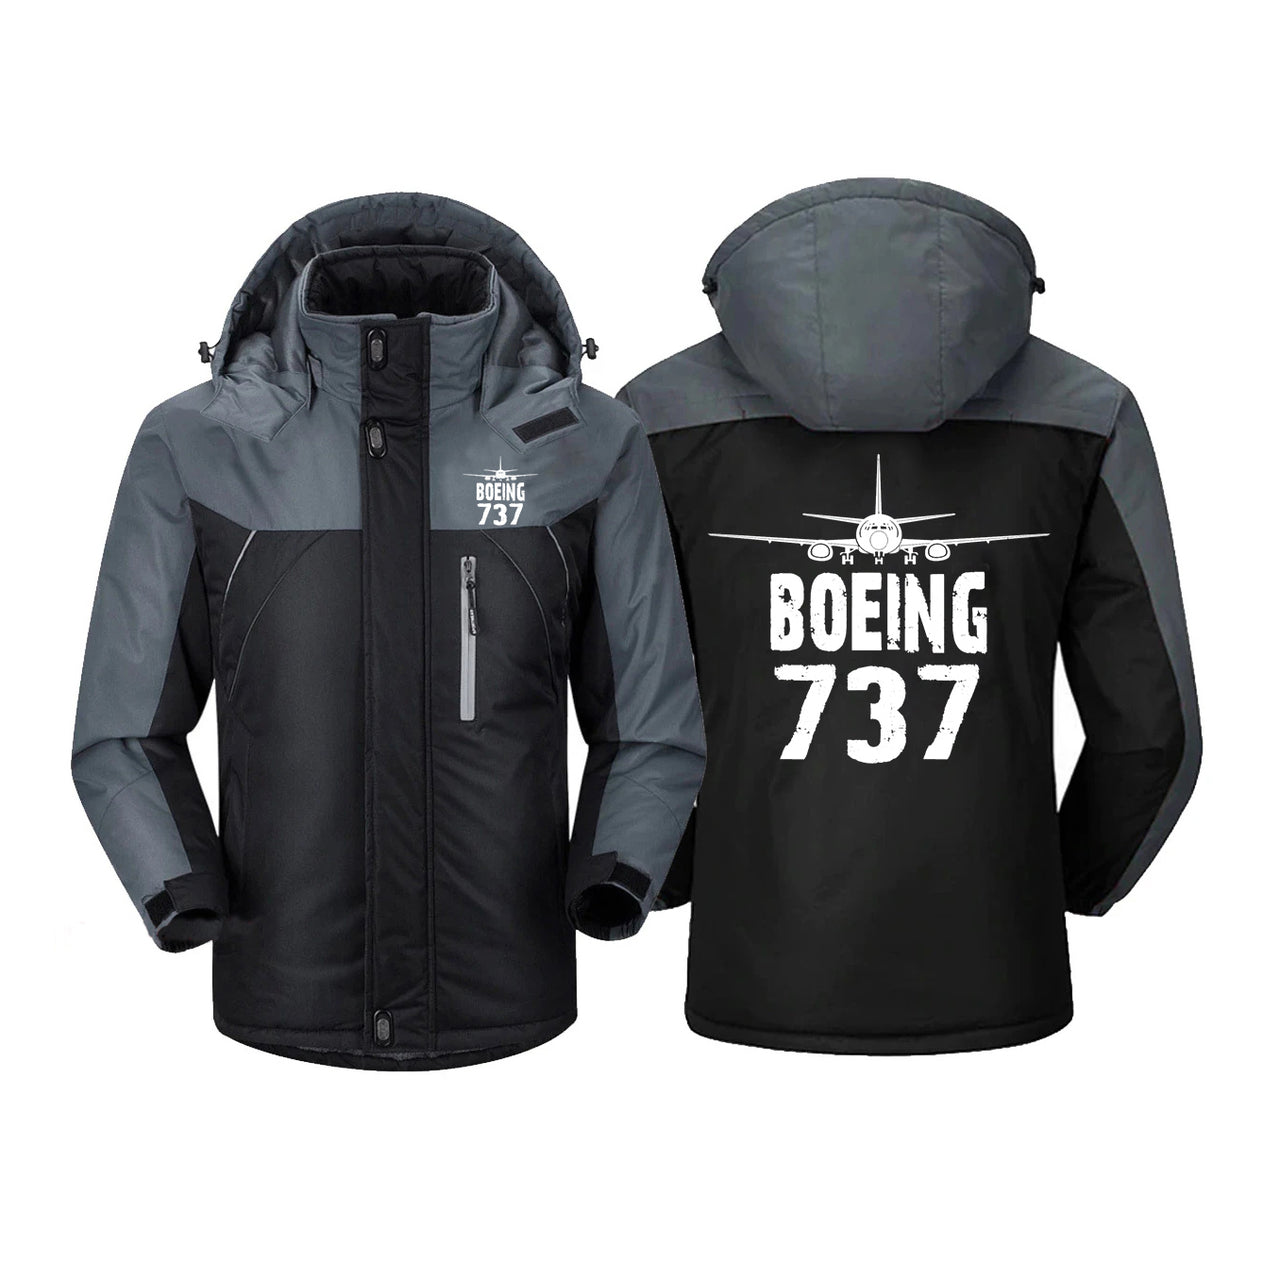 Boeing 737 & Plane Designed Thick Winter Jackets